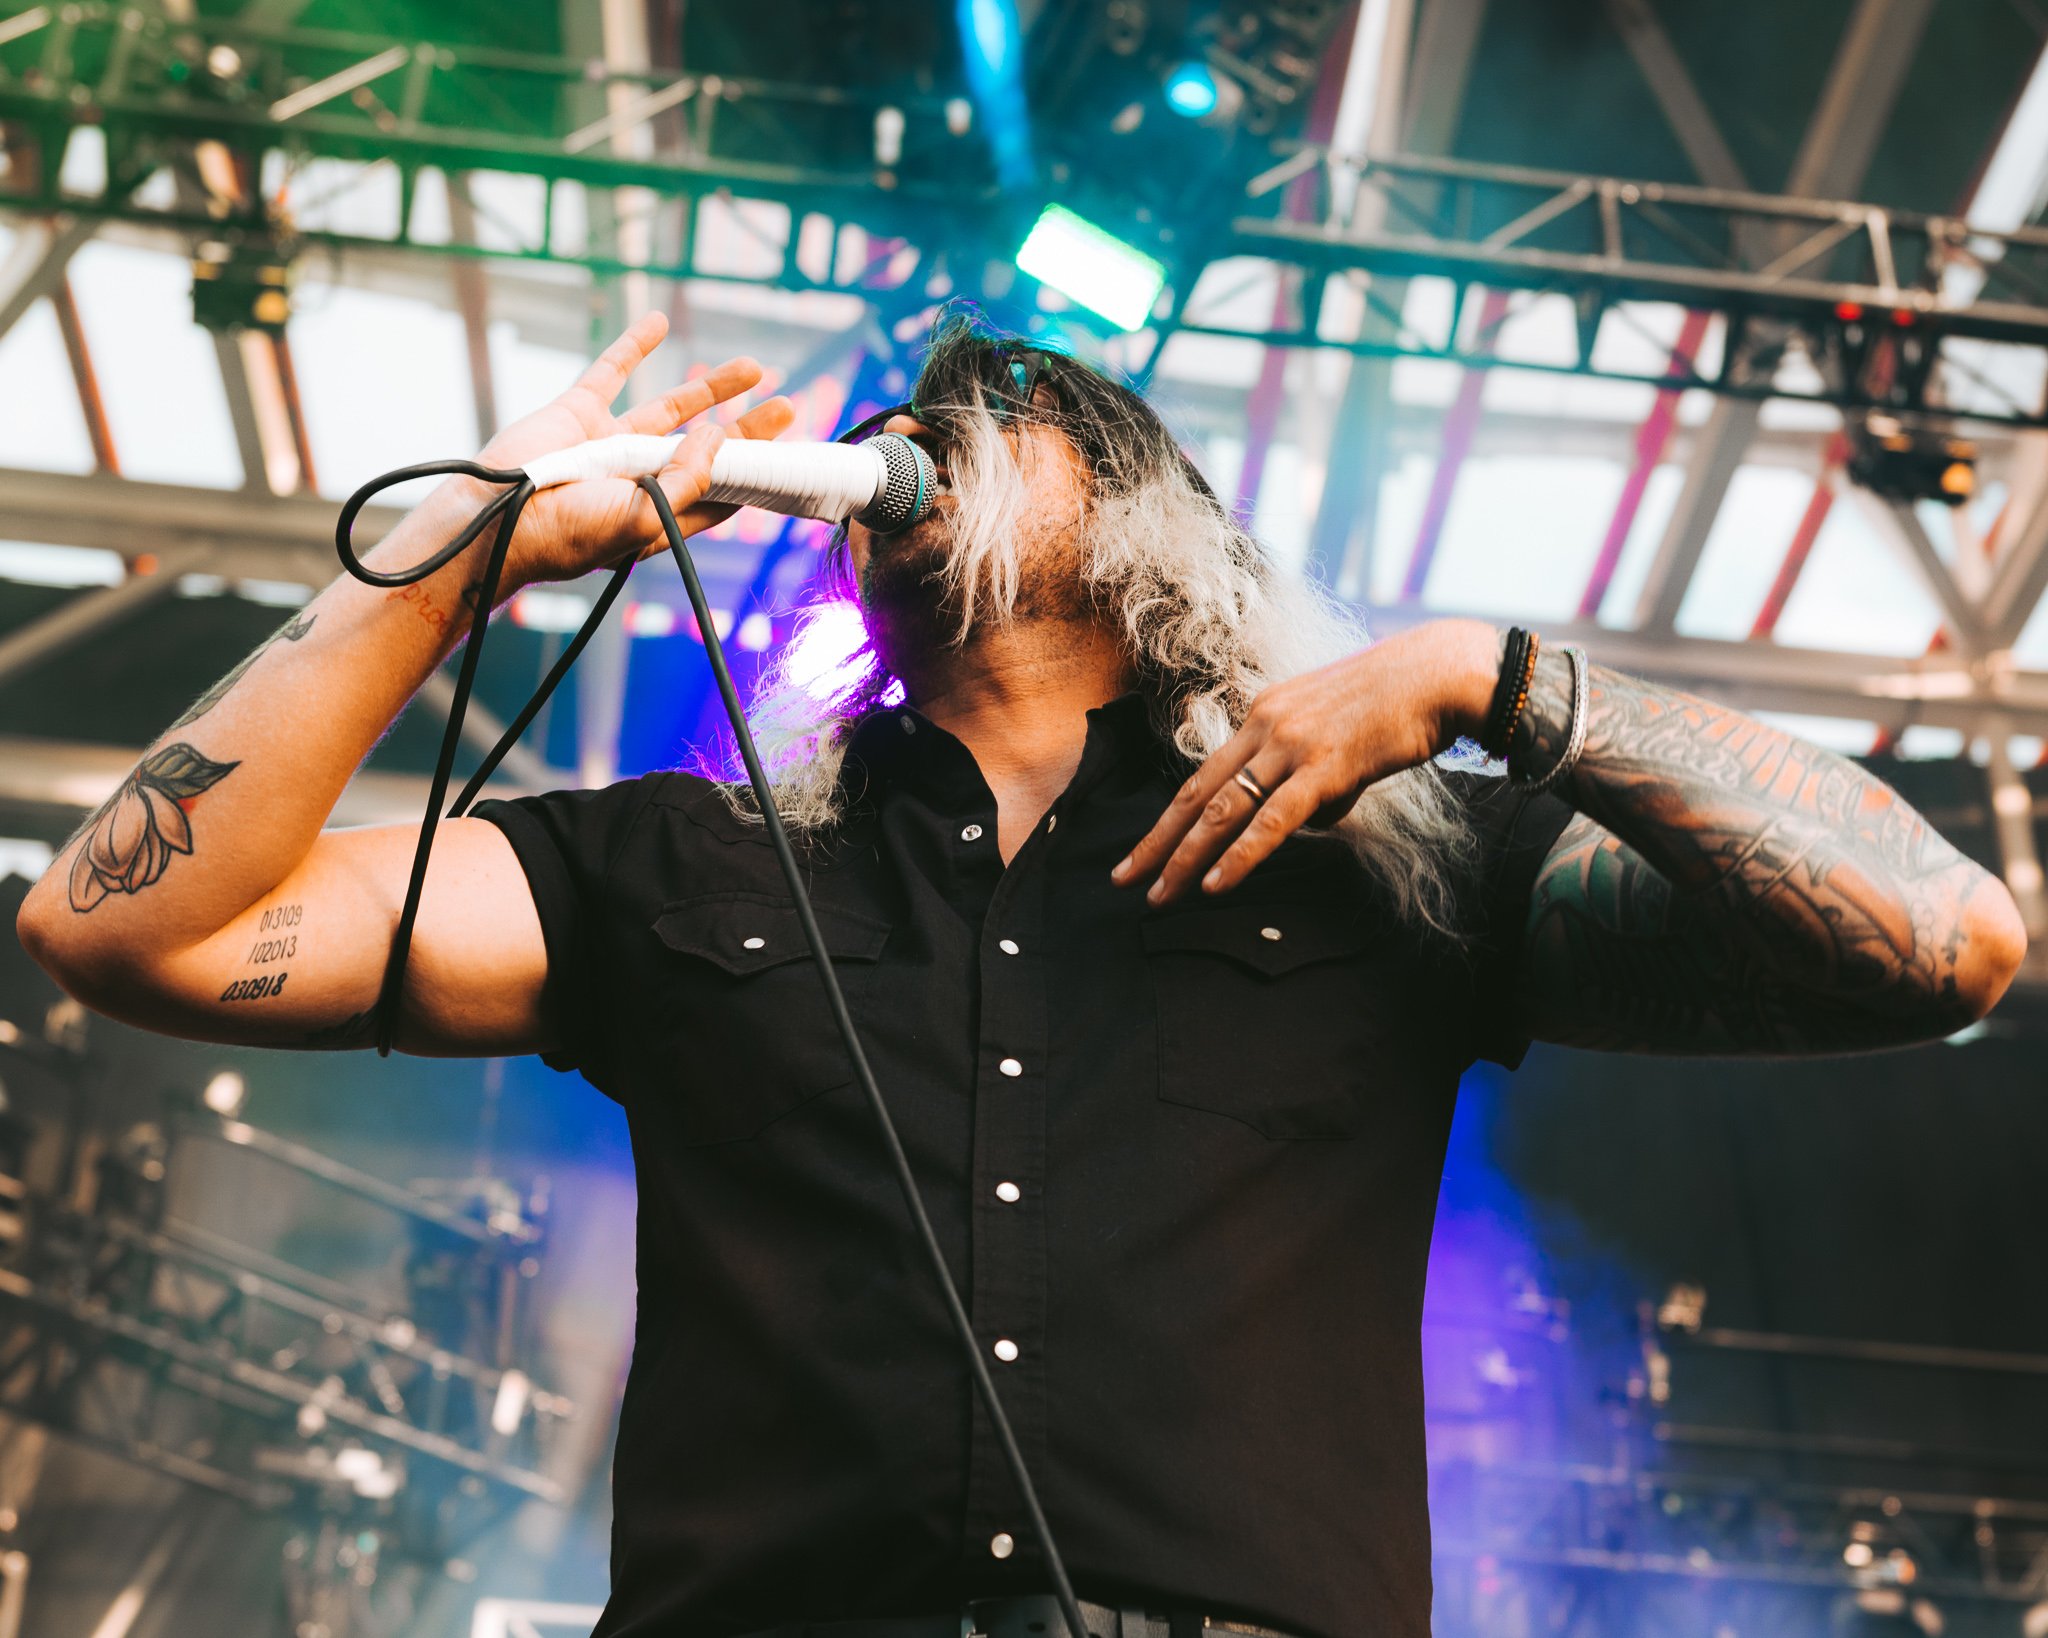  Taking Back Sunday frontman Adam Lazzara commands the stage. 